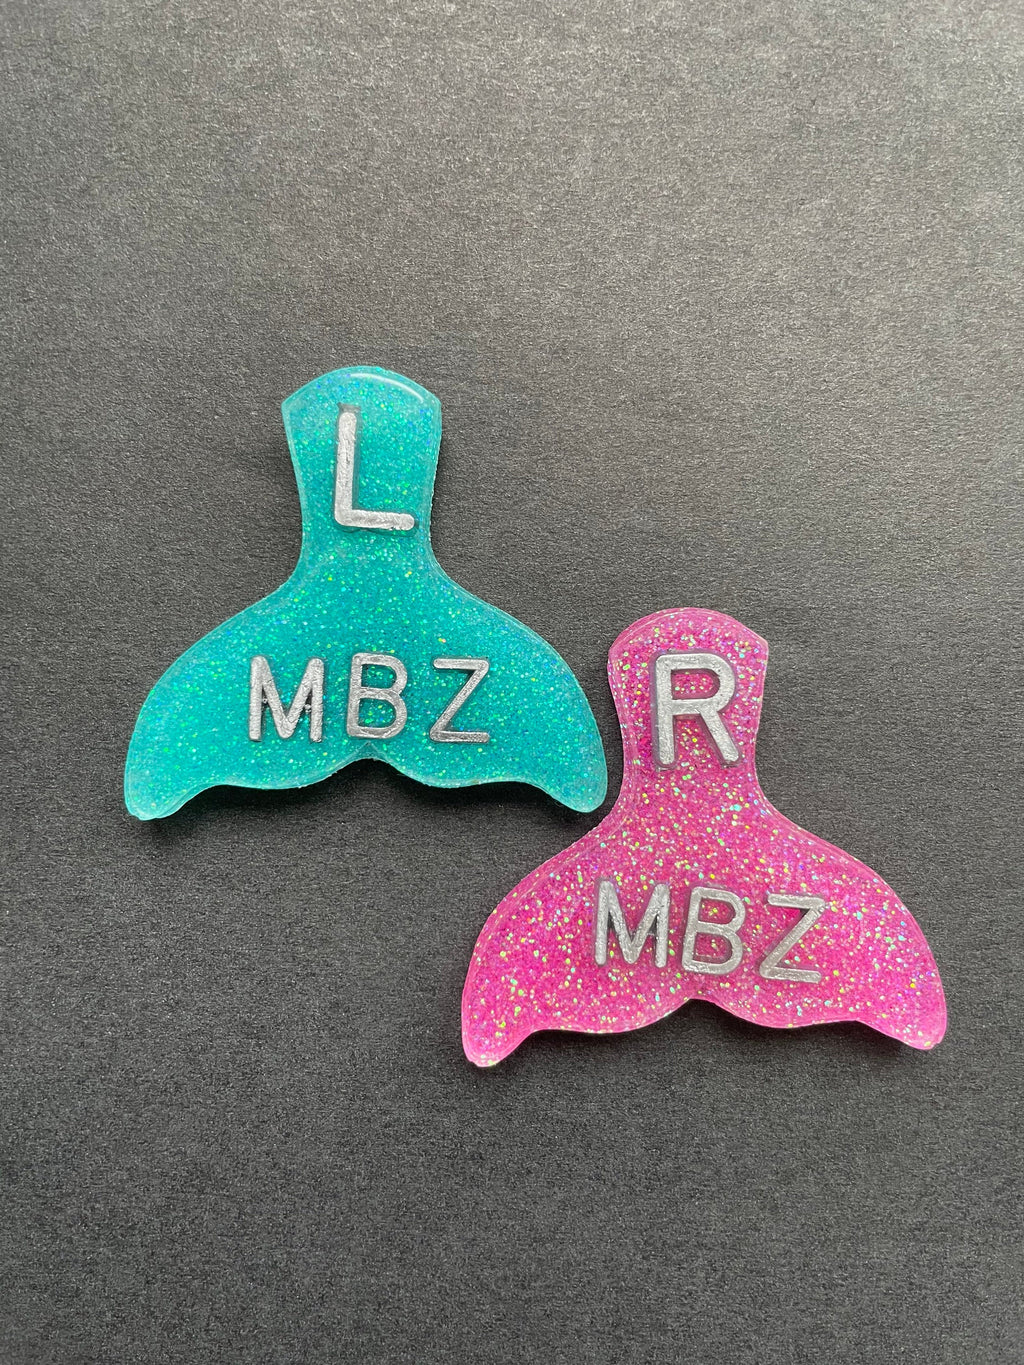 Whale Tail, Mermaid Tail, Xray Markers, With Initials, Glitter